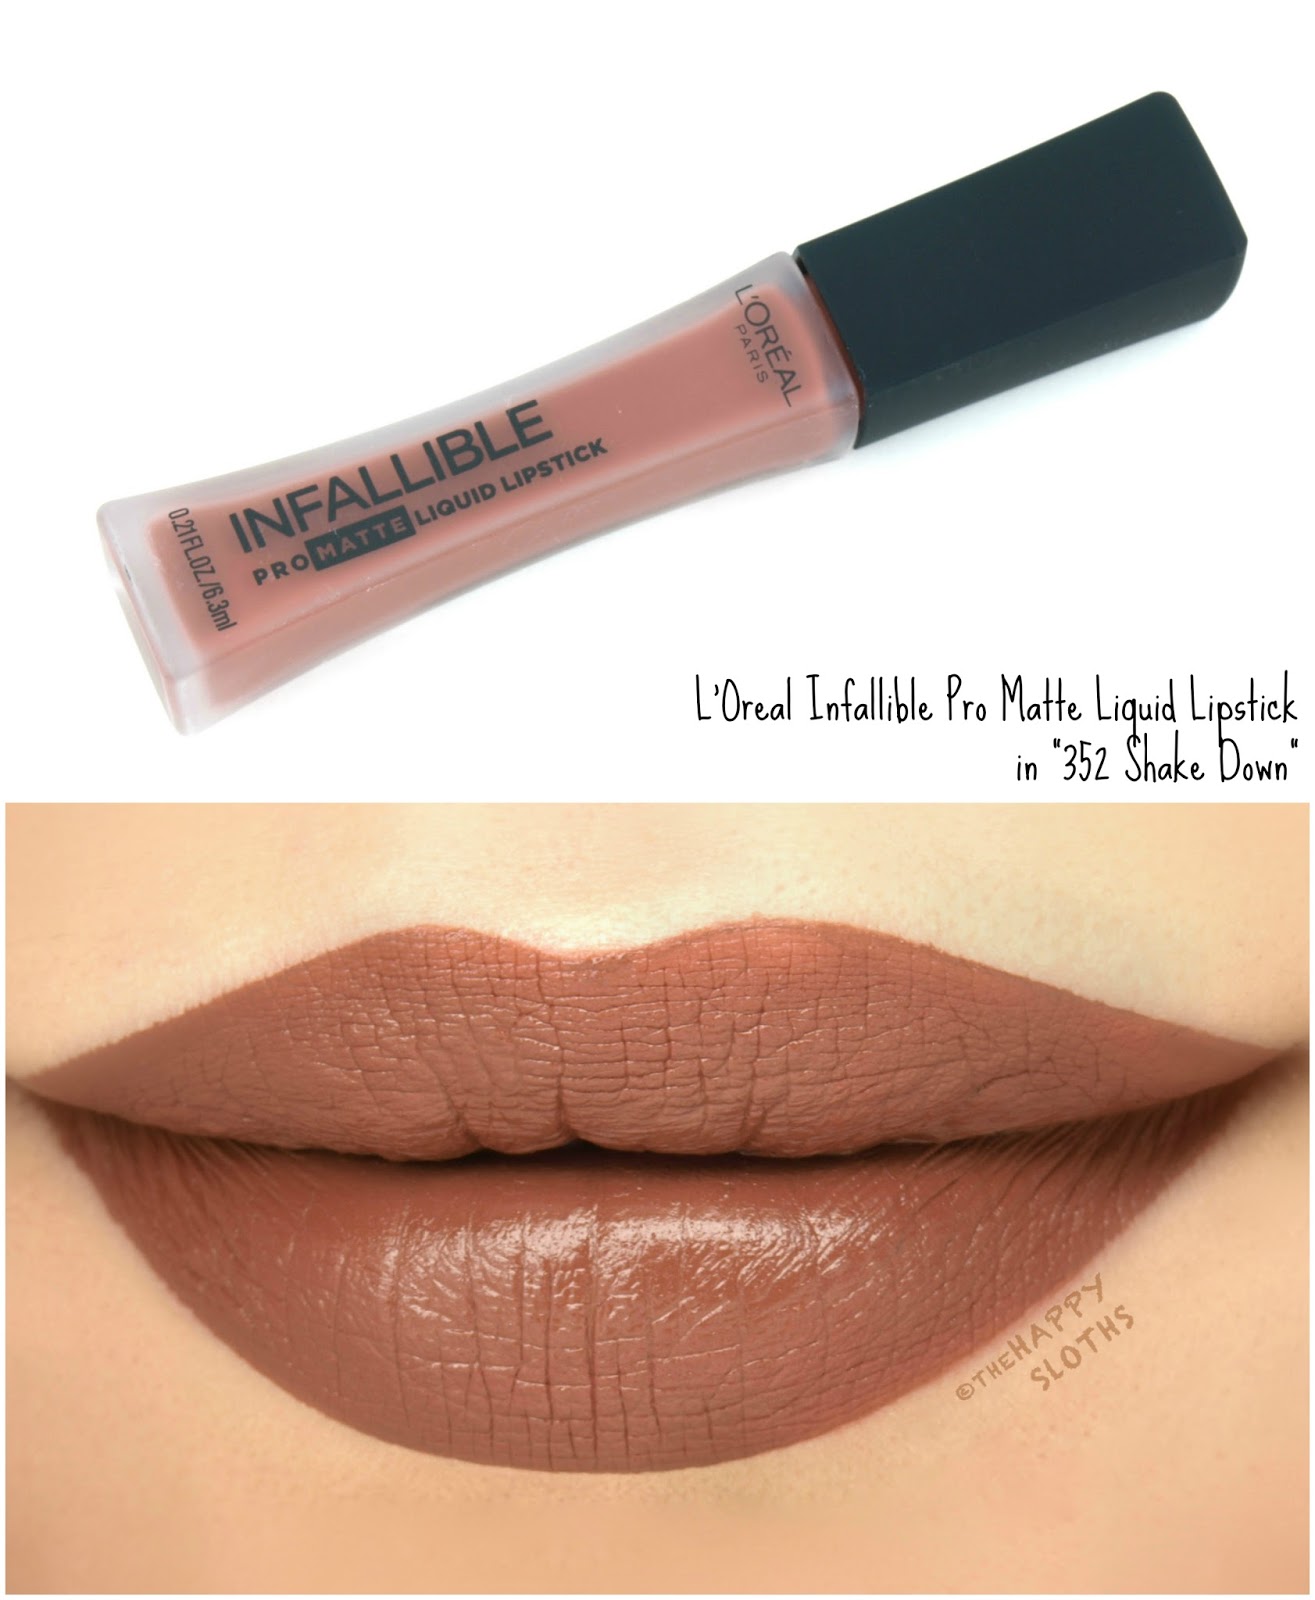 L'Oreal Infallible Pro Matte Liquid Lipsticks "352 Shake Down": Review and Swatches